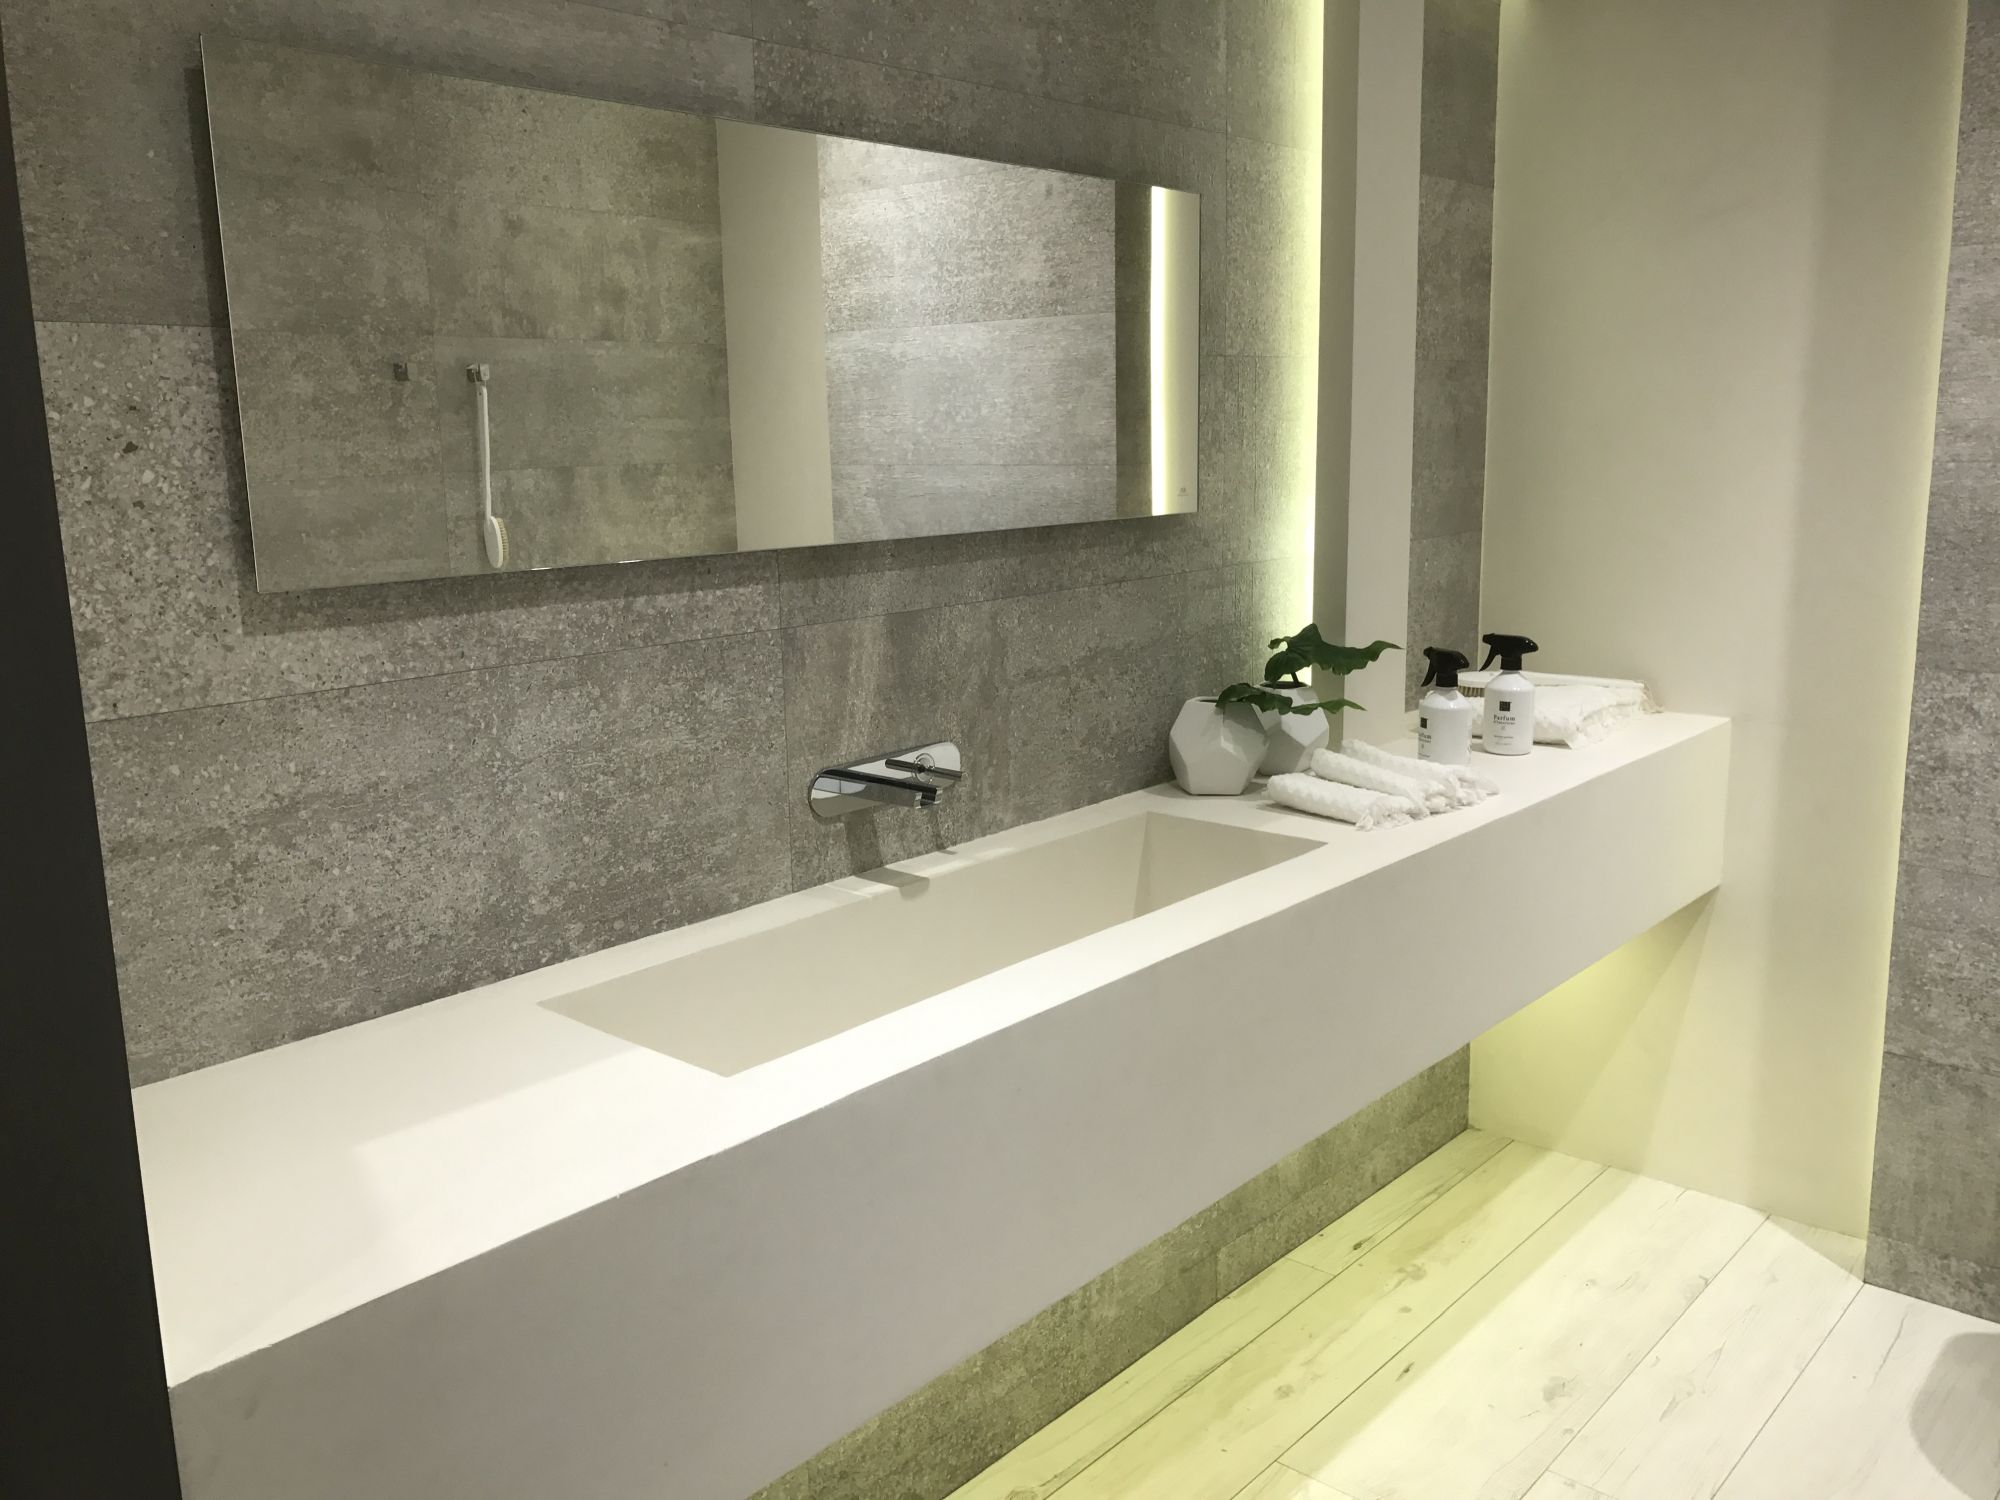 Concrete inspired wall tiles with white large bathroom sink by Porcelanosa